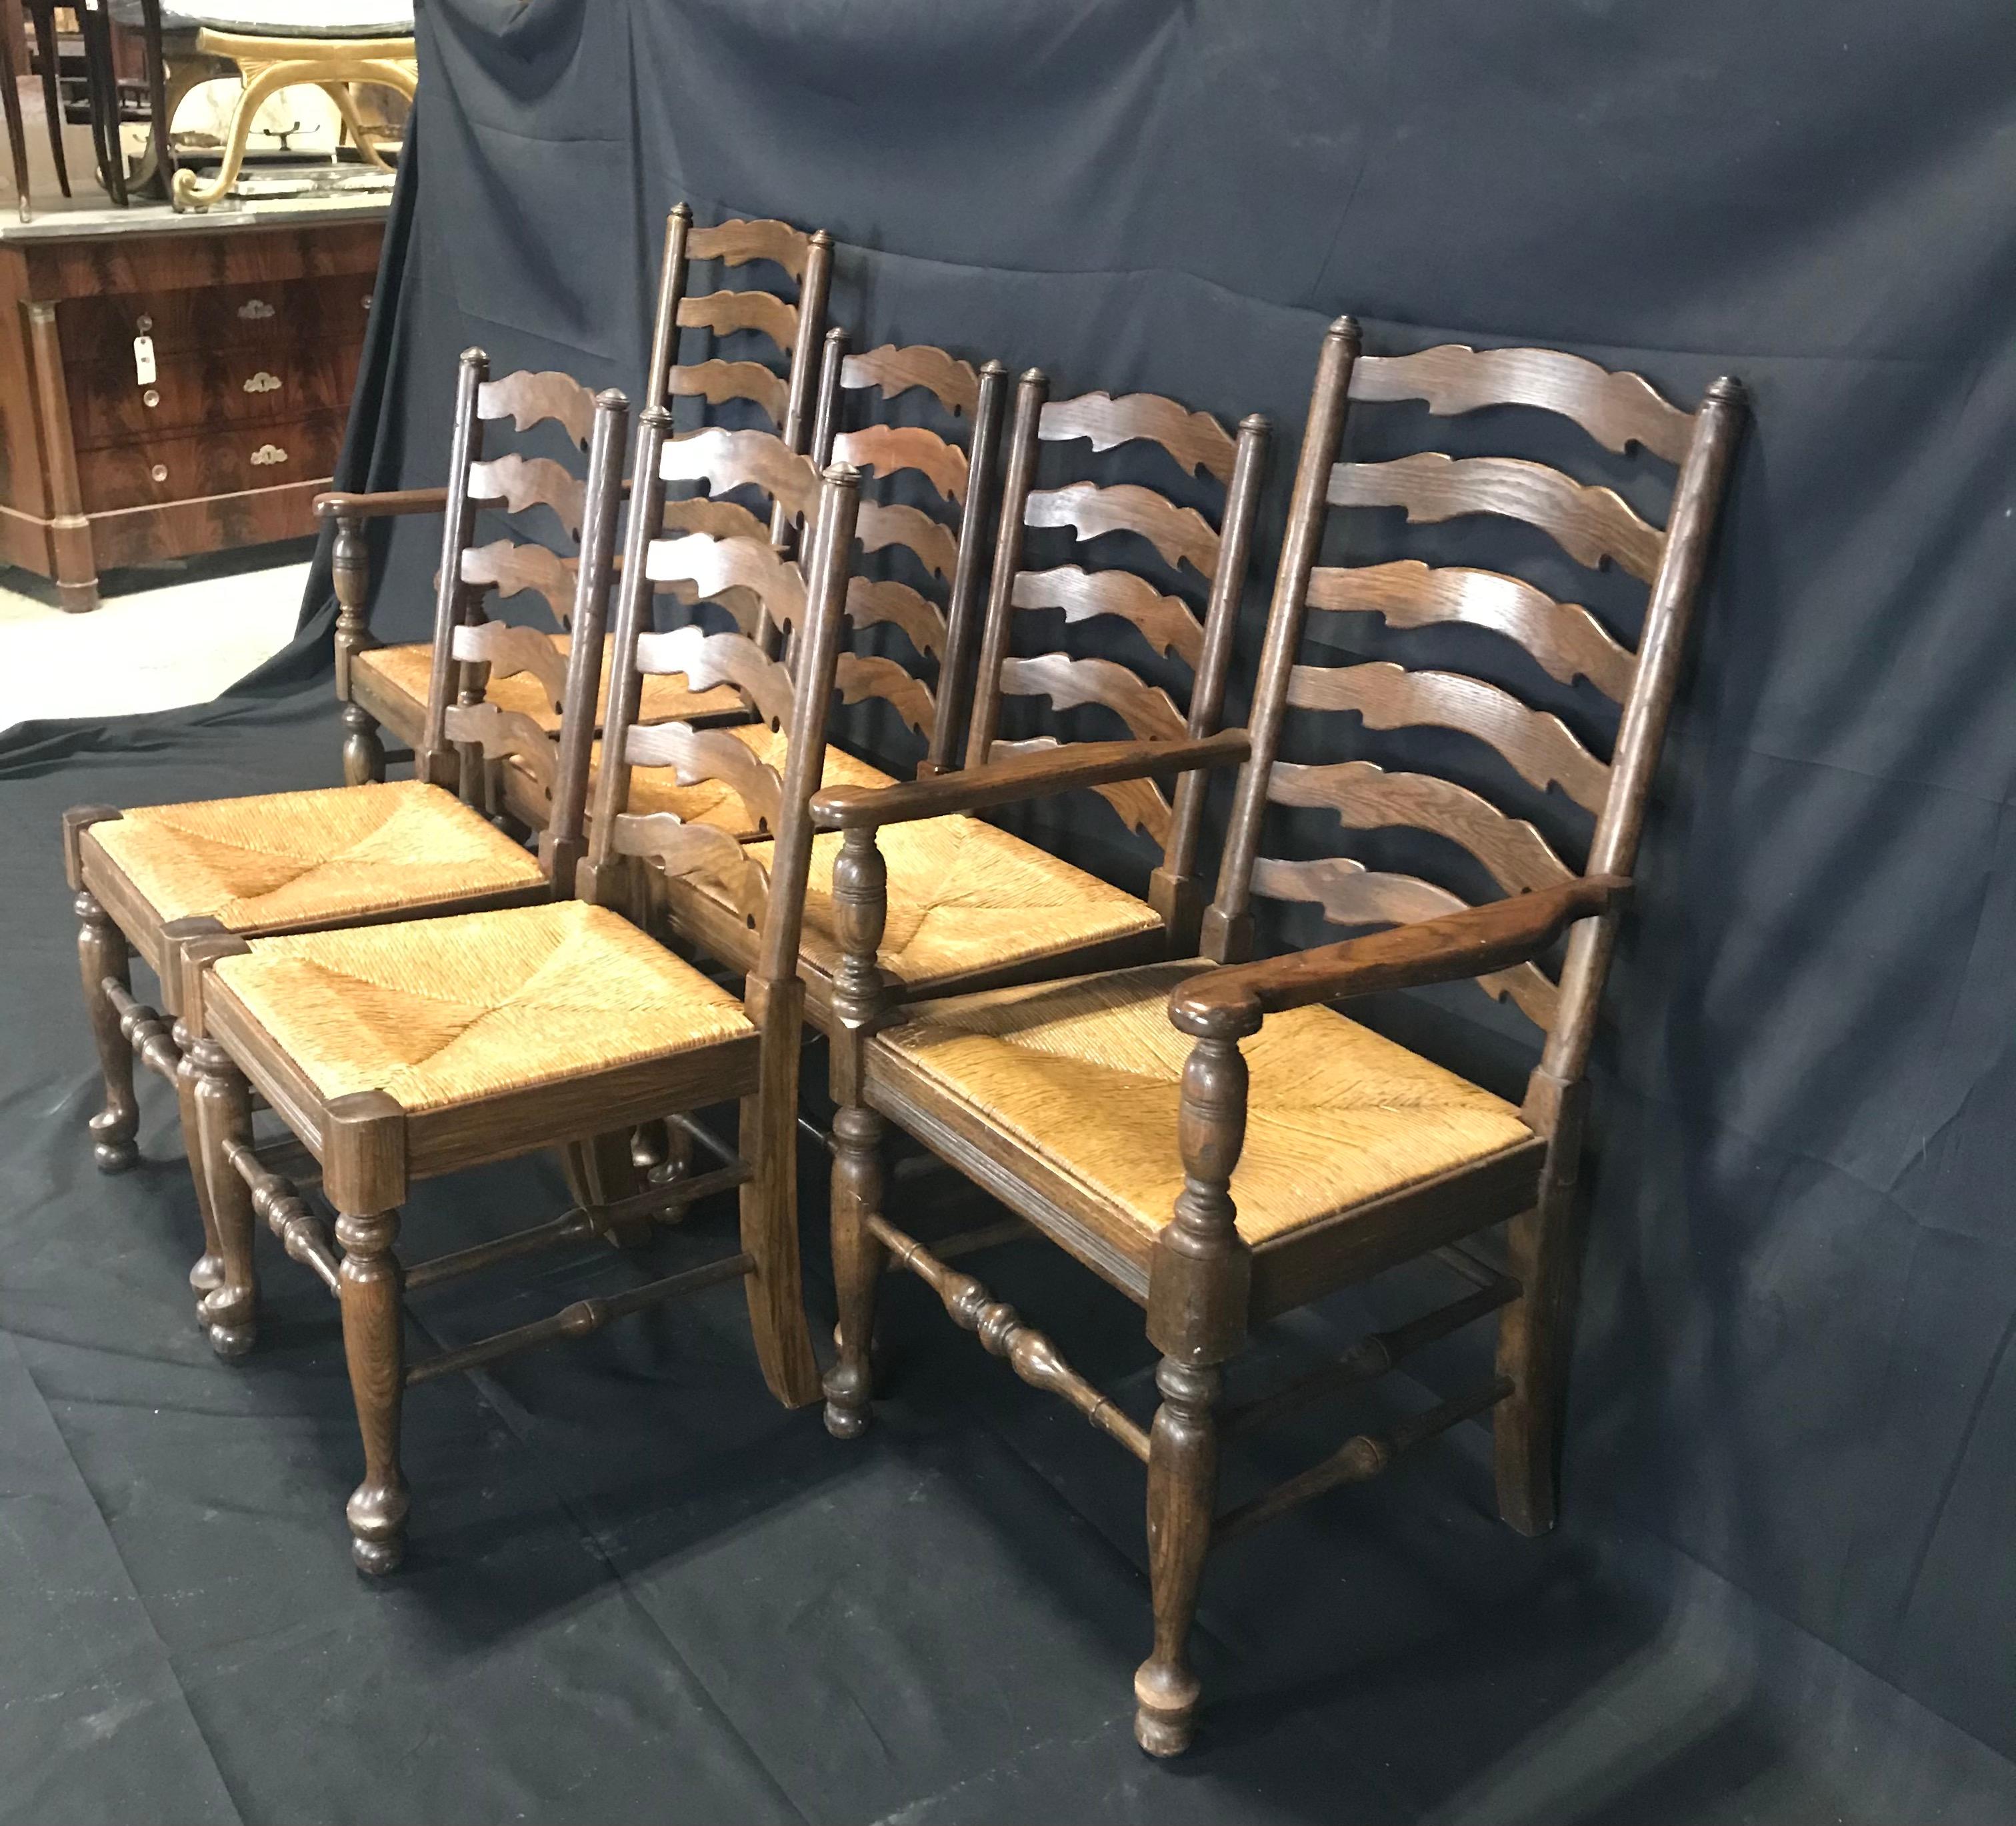 A wonderful set of six super high quality English wavy ladder back chairs just waiting for everyday use in a country kitchen. Really adds elegance and visual punch to the Classic ladder back style. There are two armchairs and 4 sides, all very